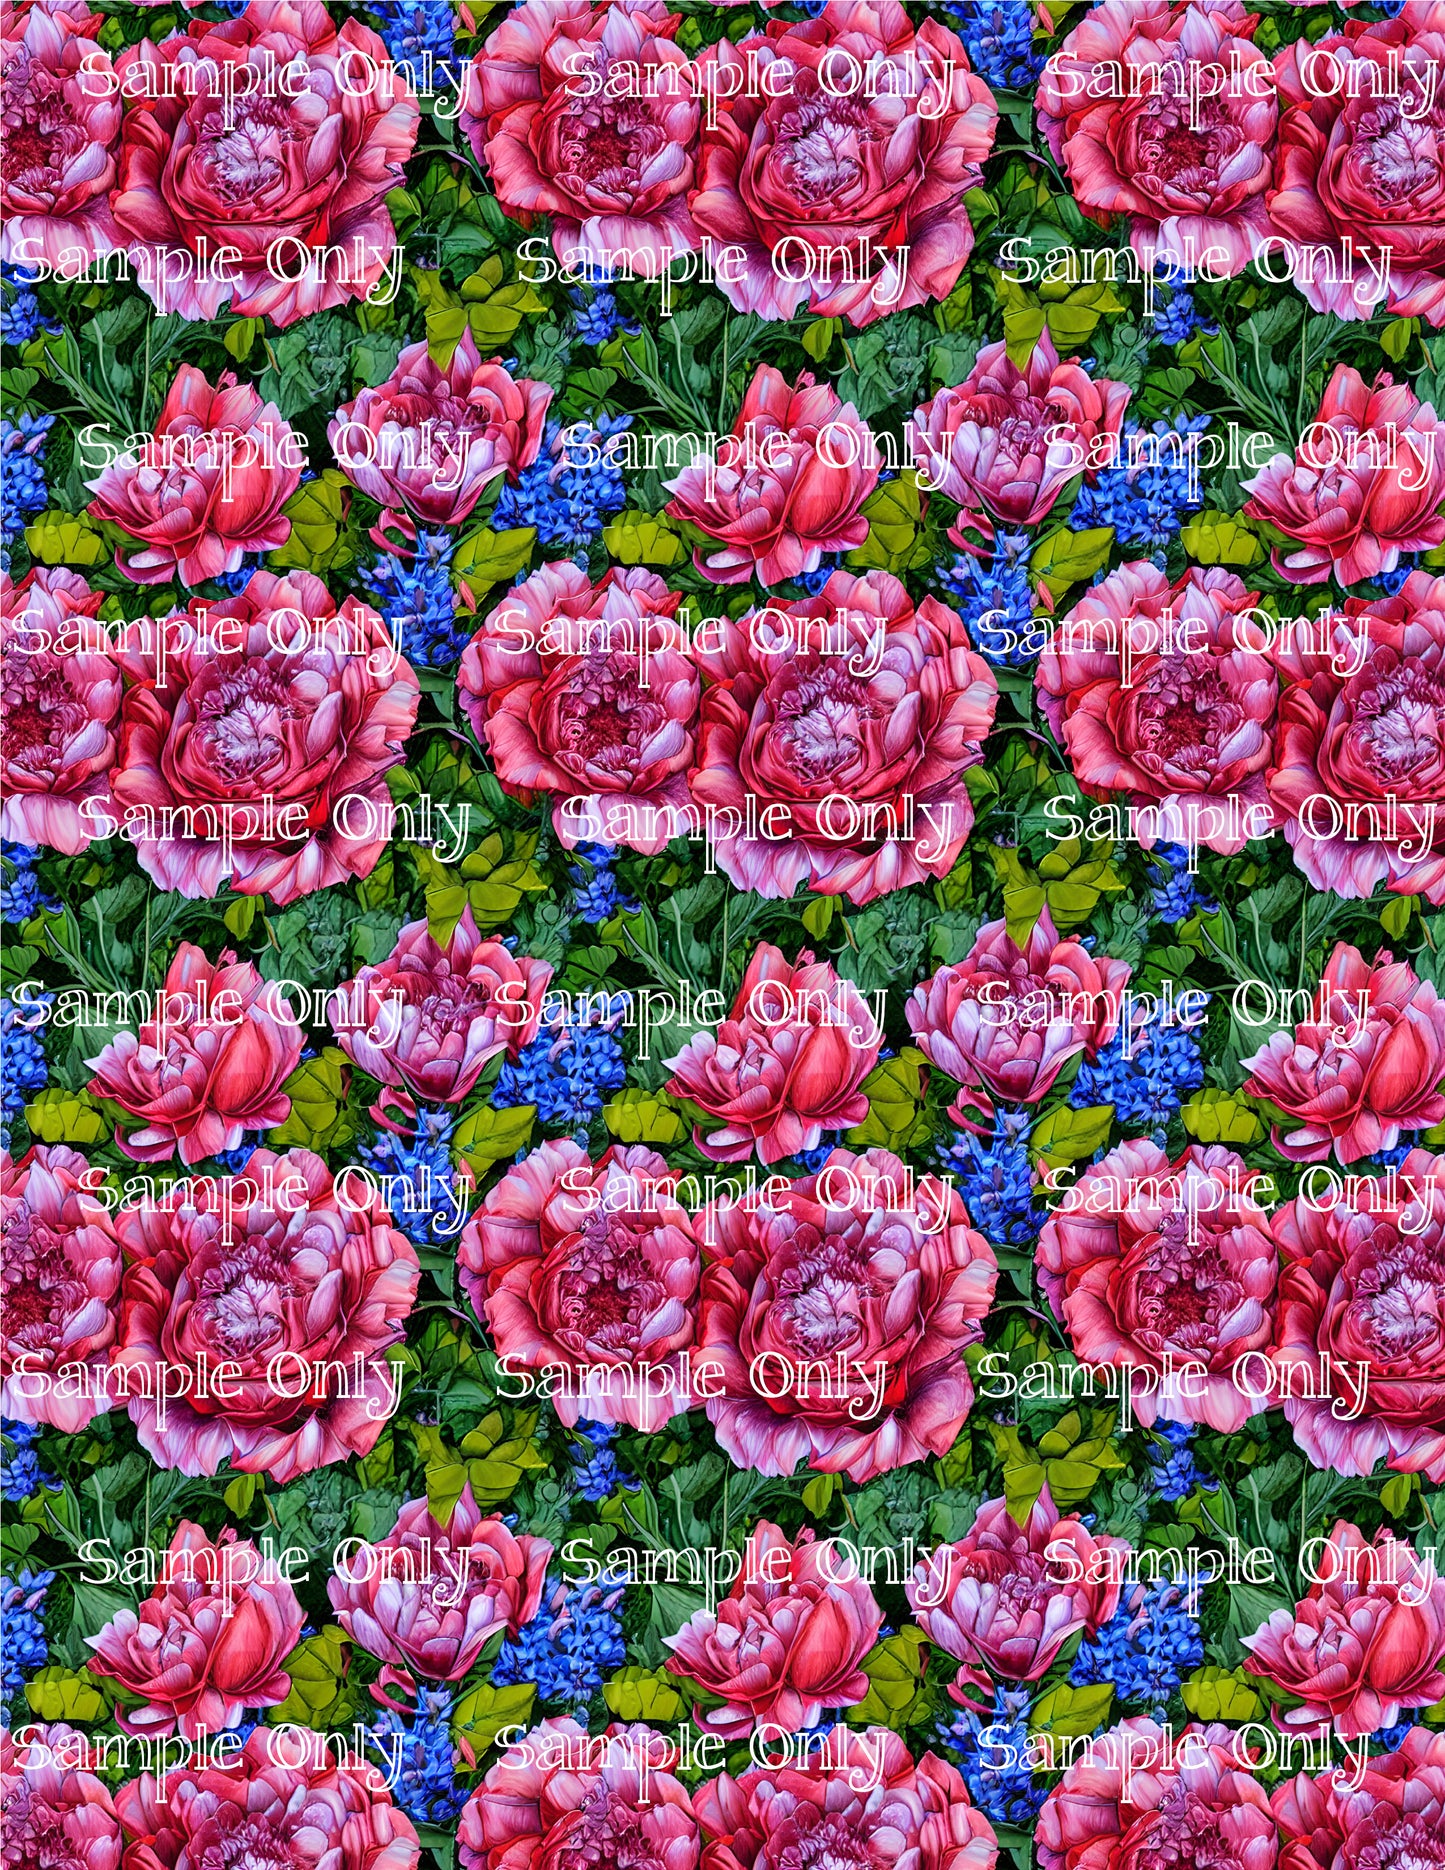 Impressionist Floral Flower Pattern Image Sheet For Polymer Clay Transfer Decal DIGITAL FILE OR PRINTED IFL28